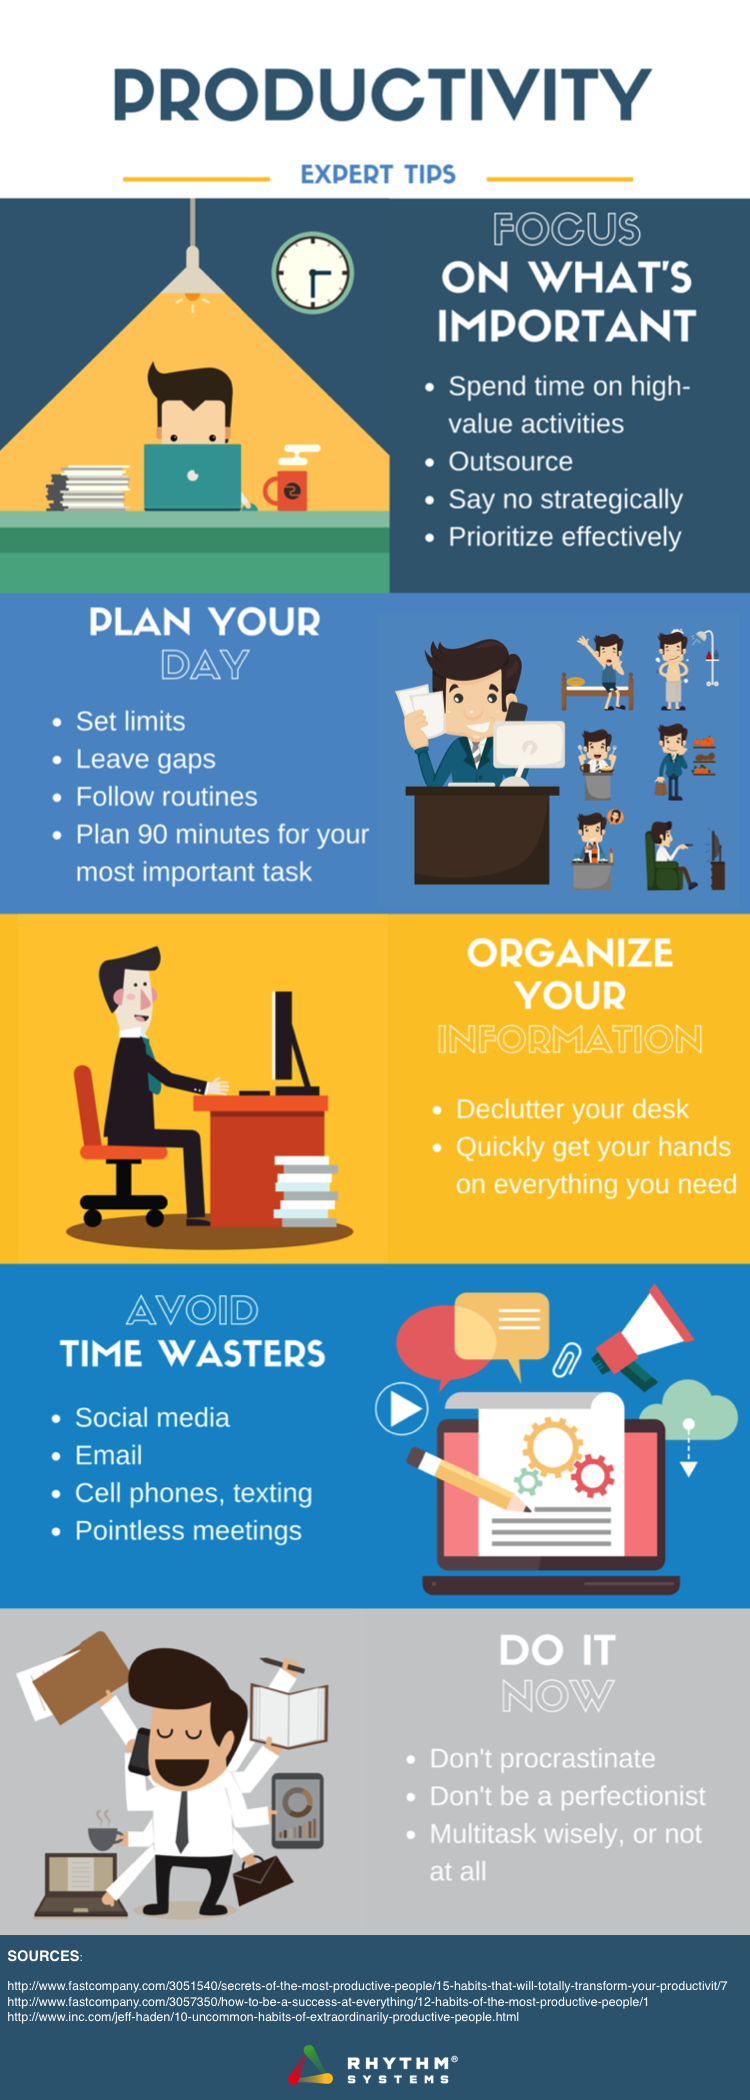 https://www.rhythmsystems.com/hubfs/For_Blogs/productivity_tips_infographic.png